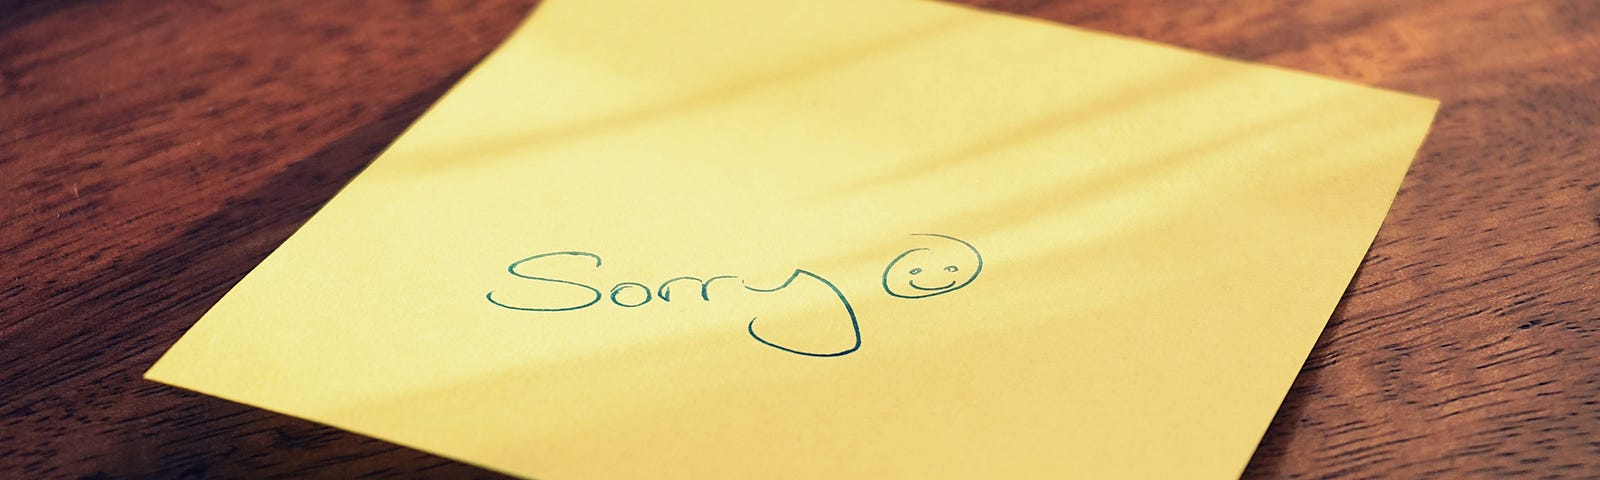 A post-it note saying “sorry” with accompanying smiley face in Biro.